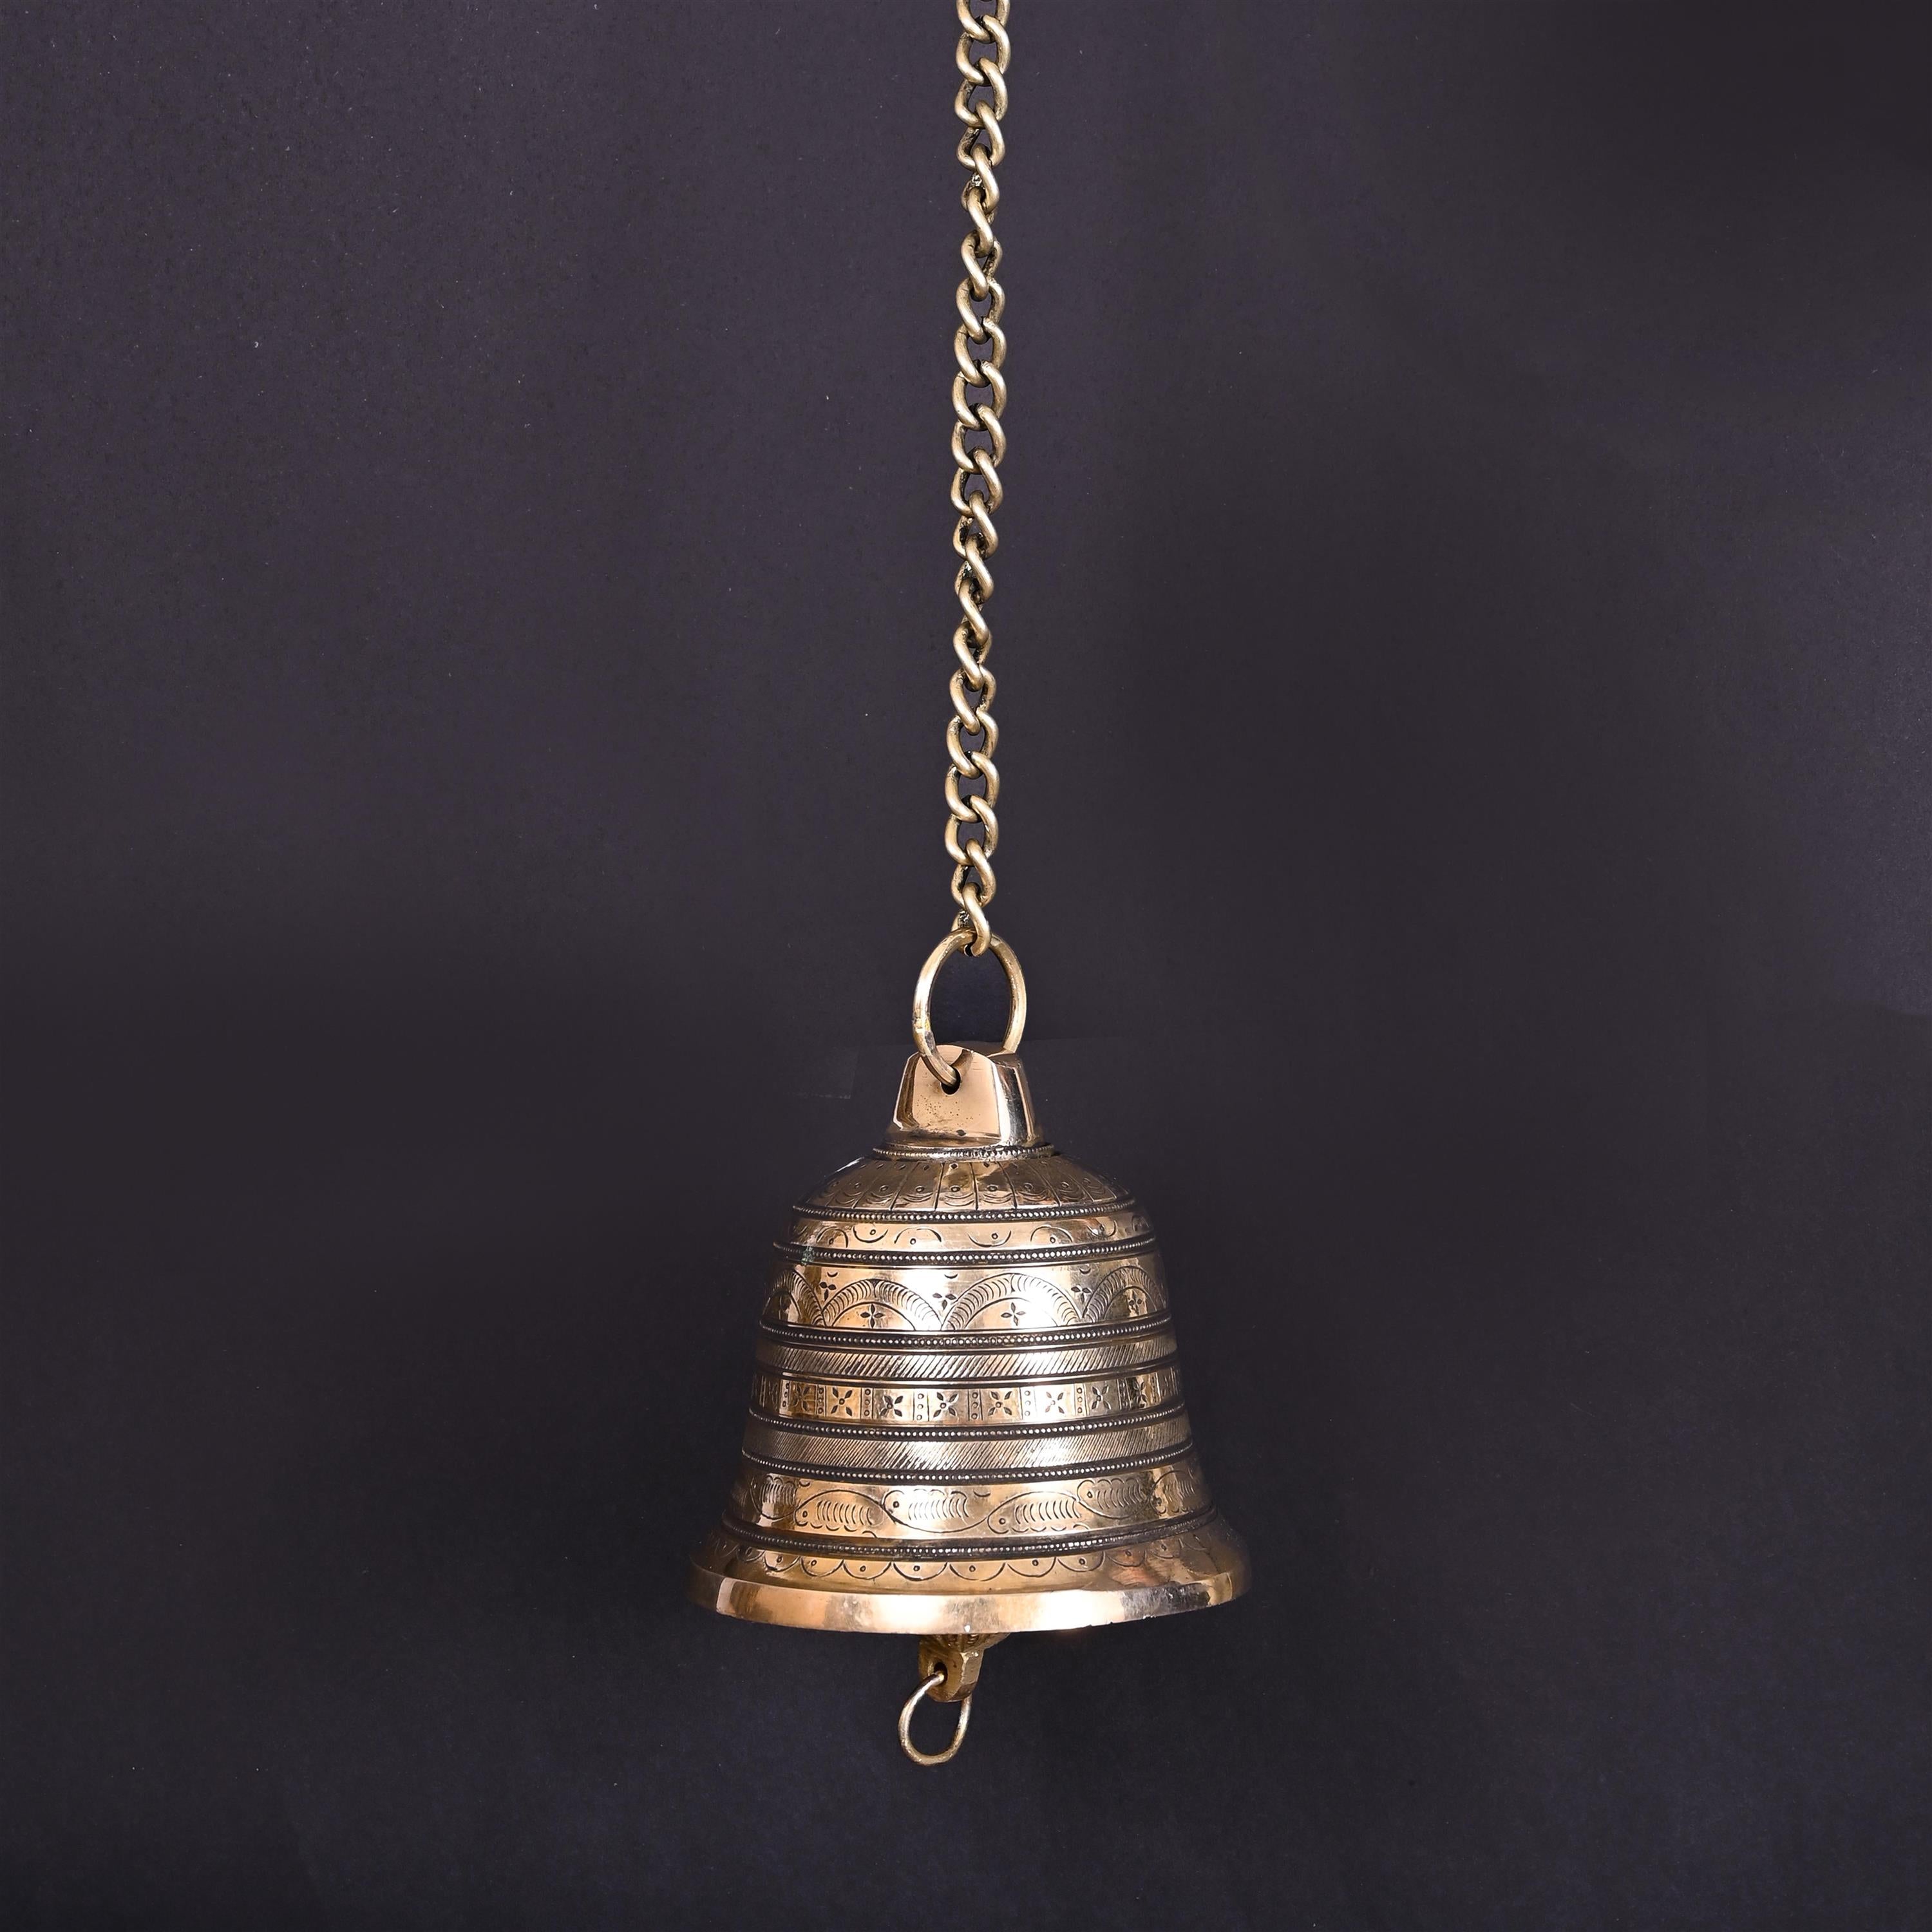 Purpledip Temple Hanging Bell : Small Bell for Home Temple, Door, Hallway  Chain Length 15 inch(10783)